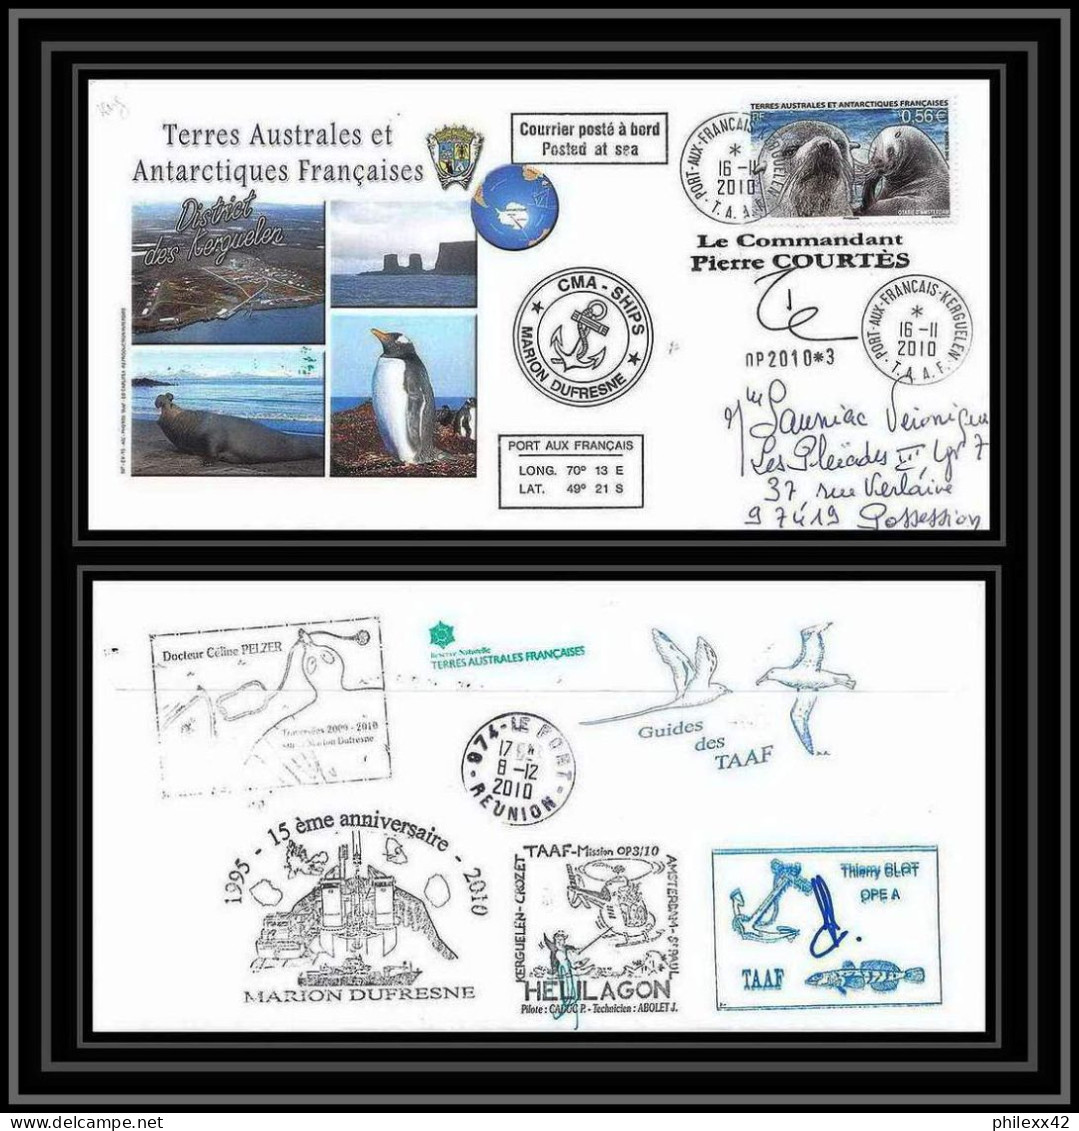 3040 Helilagon Dufresne Signé Signed Op 16/11/2010/3 Kerguelen N°569 Otarie Seal Terres Australes (taaf) Lettre Cover - Hélicoptères